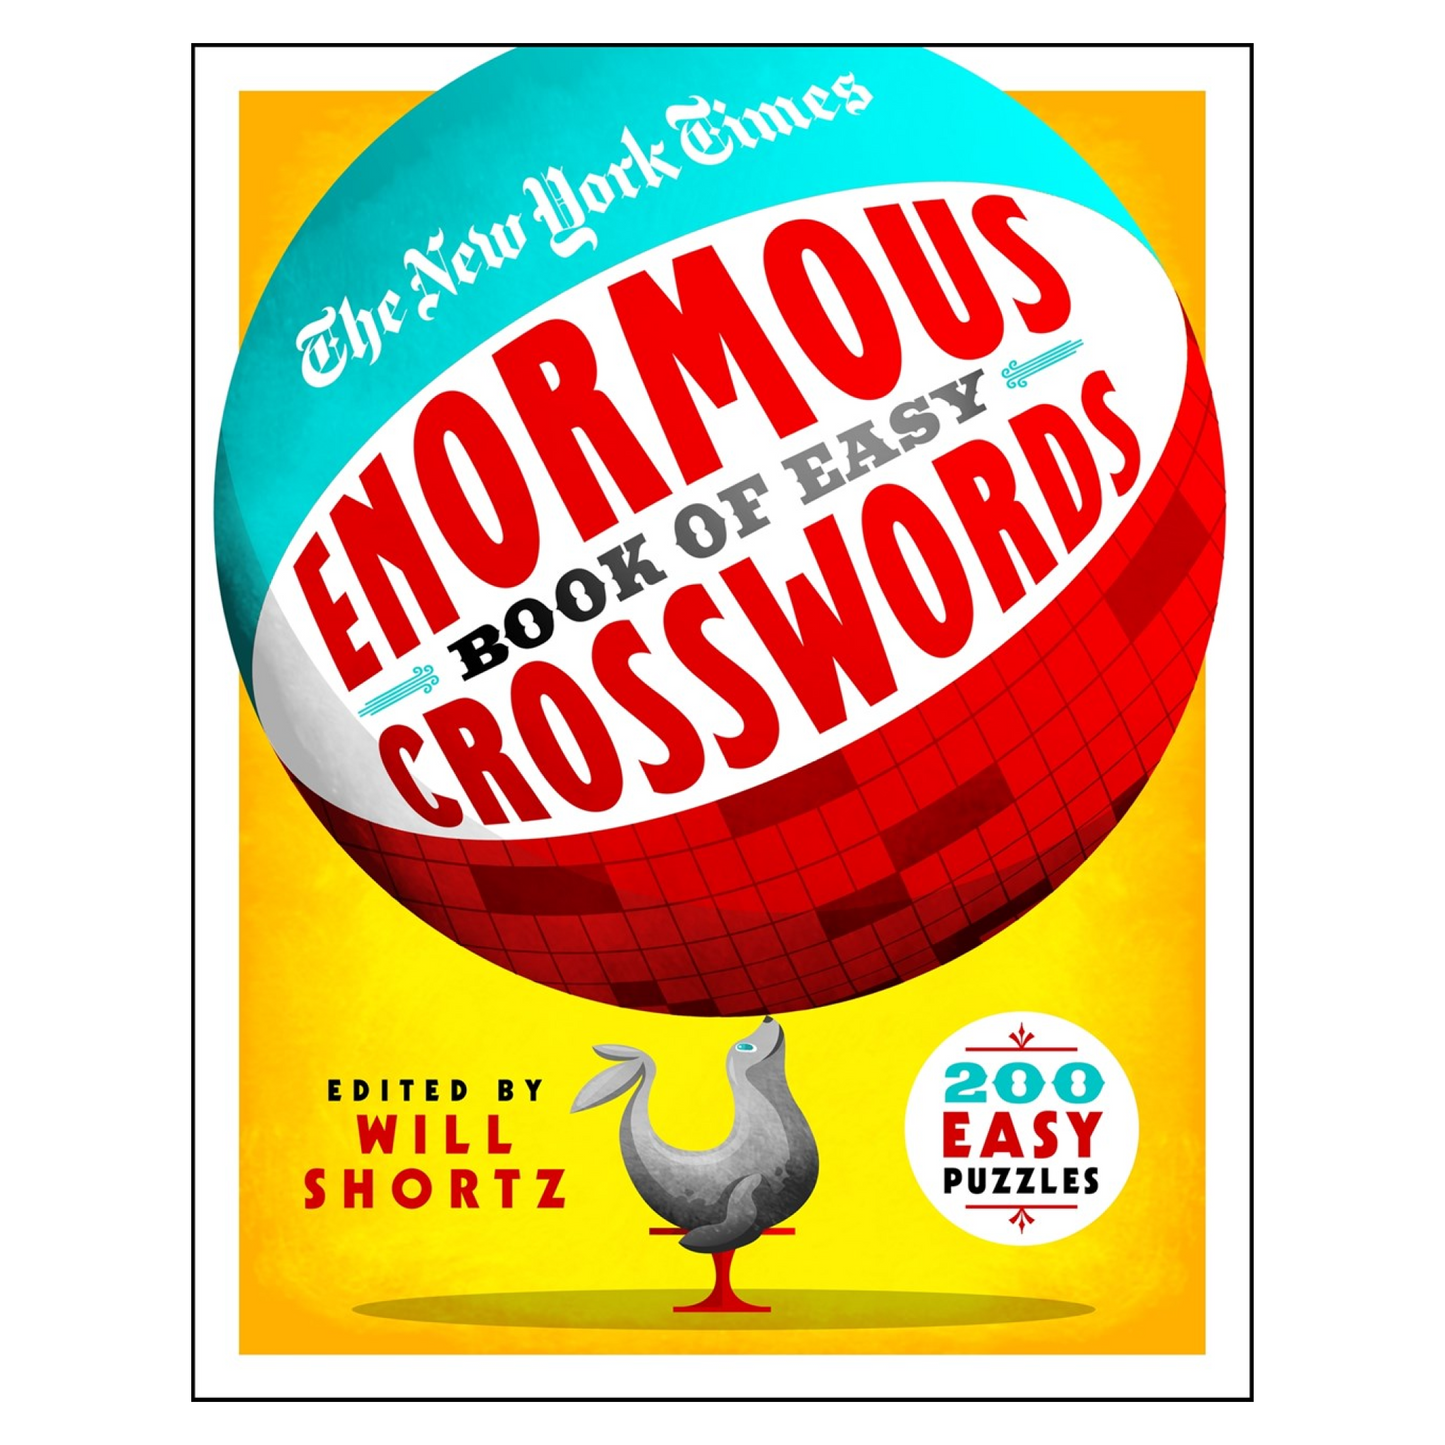 The New York Times Enormous Book of Easy Crosswords